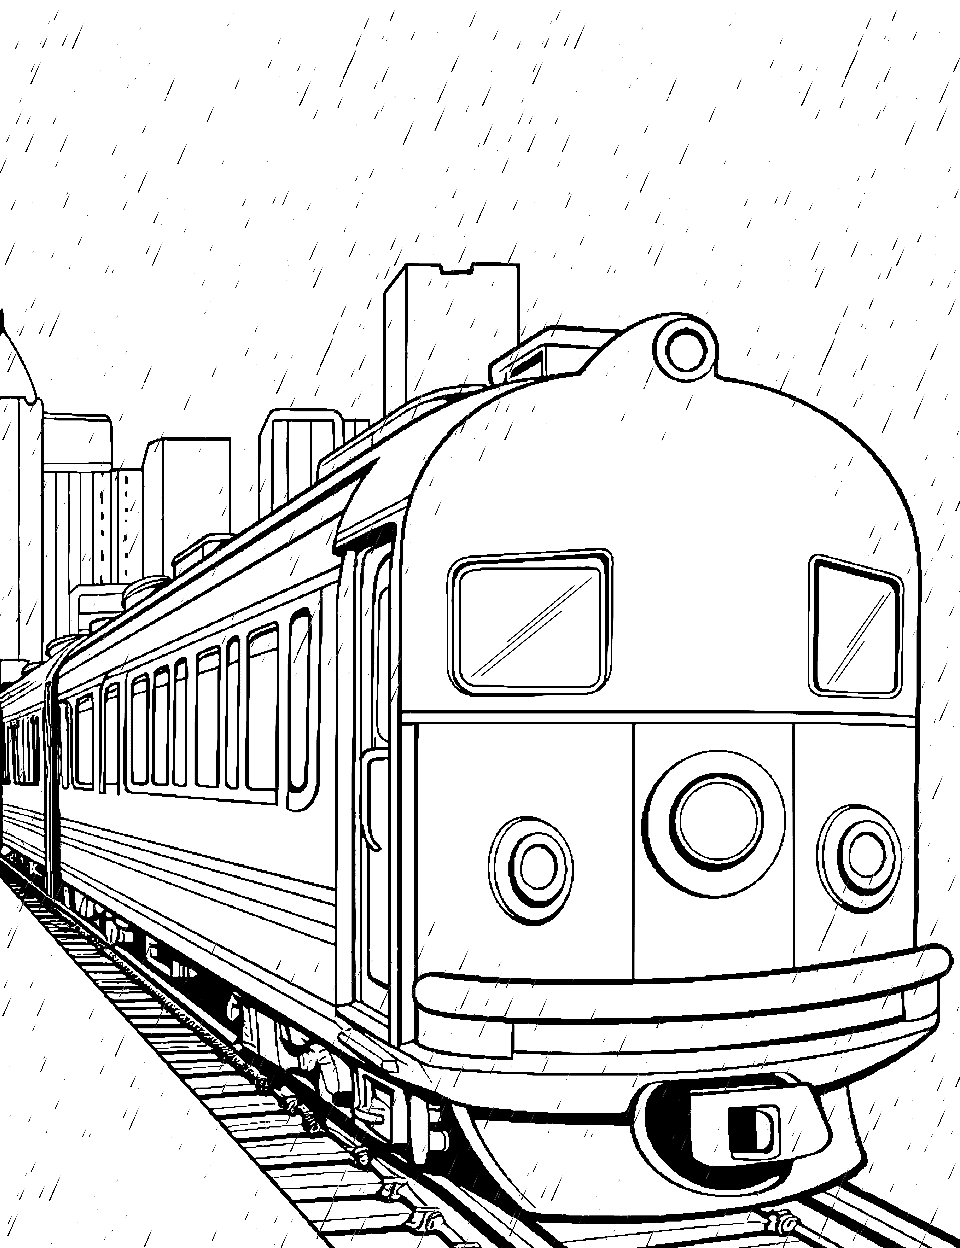 Rainy Day Commuter Train Coloring Page - A train traveling through a rainy, urban landscape.